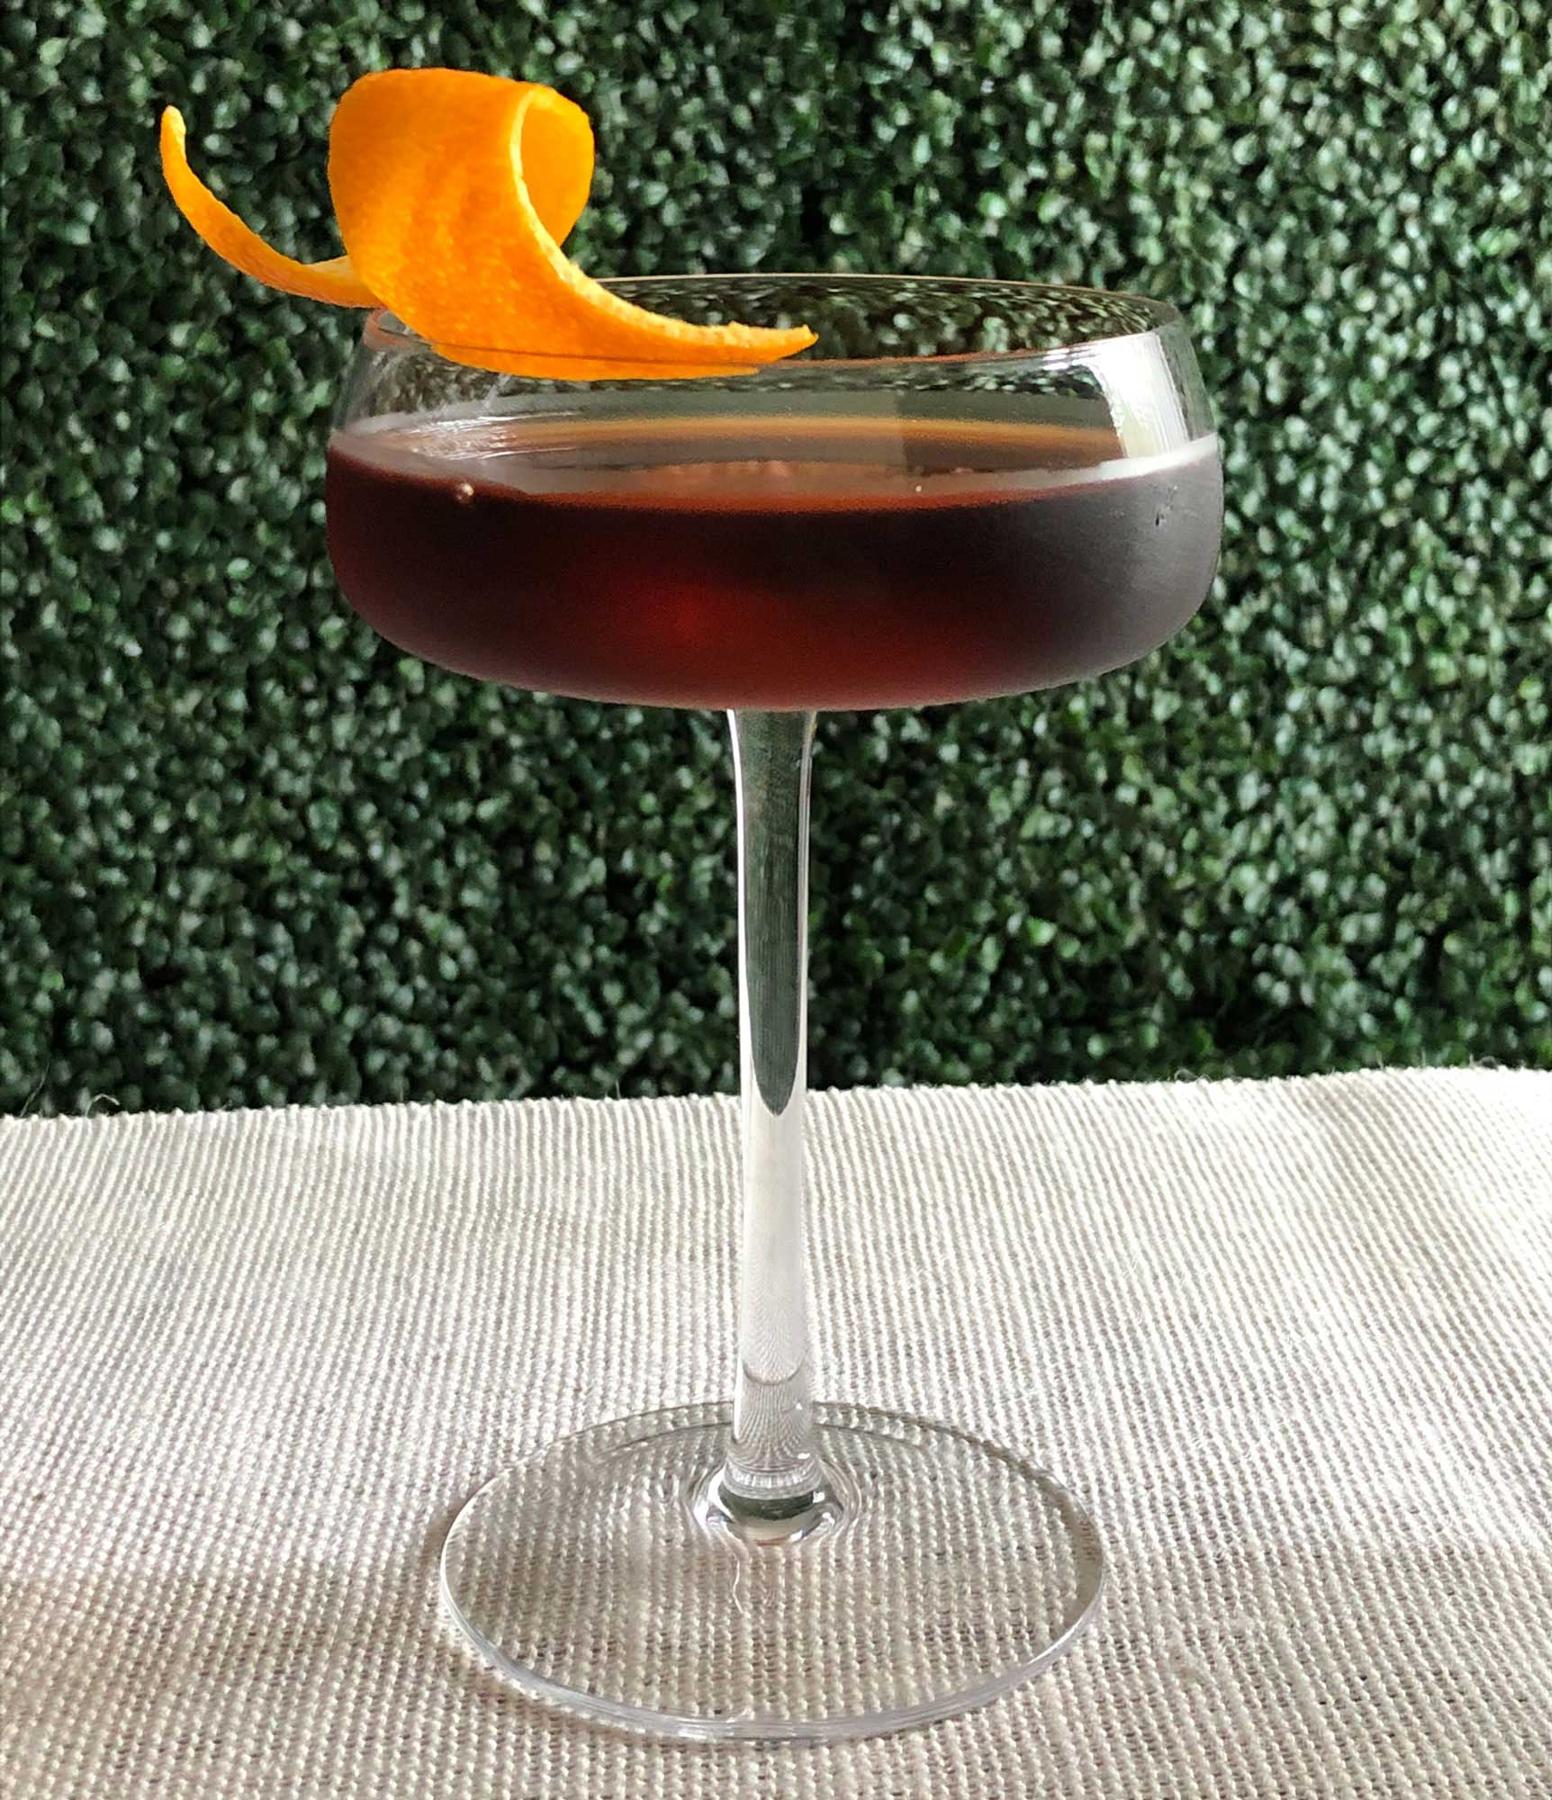 An example of the In Vida Veritas, the mixed drink (drink), by Misty Kalkofen, Boston, MA, featuring Del Maguey Mezcal Vida, Zirbenz Stone Pine Liqueur of the Alps, Nux Alpina Walnut Liqueur, Bénédictine, chocolate bitters, and orange twist; photo by Lee Edwards